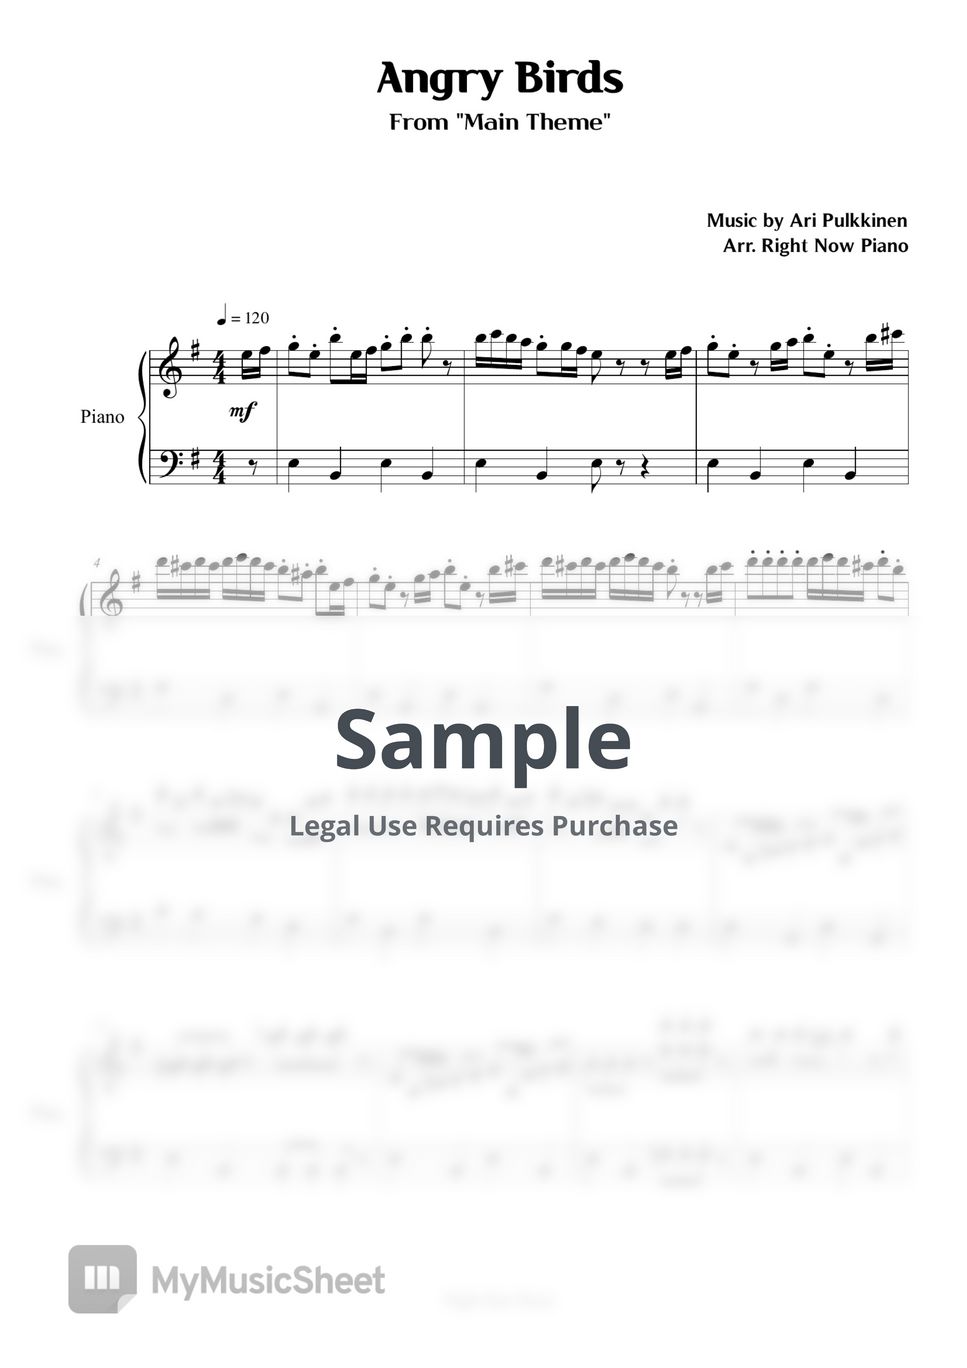 Angry Birds - Angry Birds Main Theme Sheets by Right Now Piano